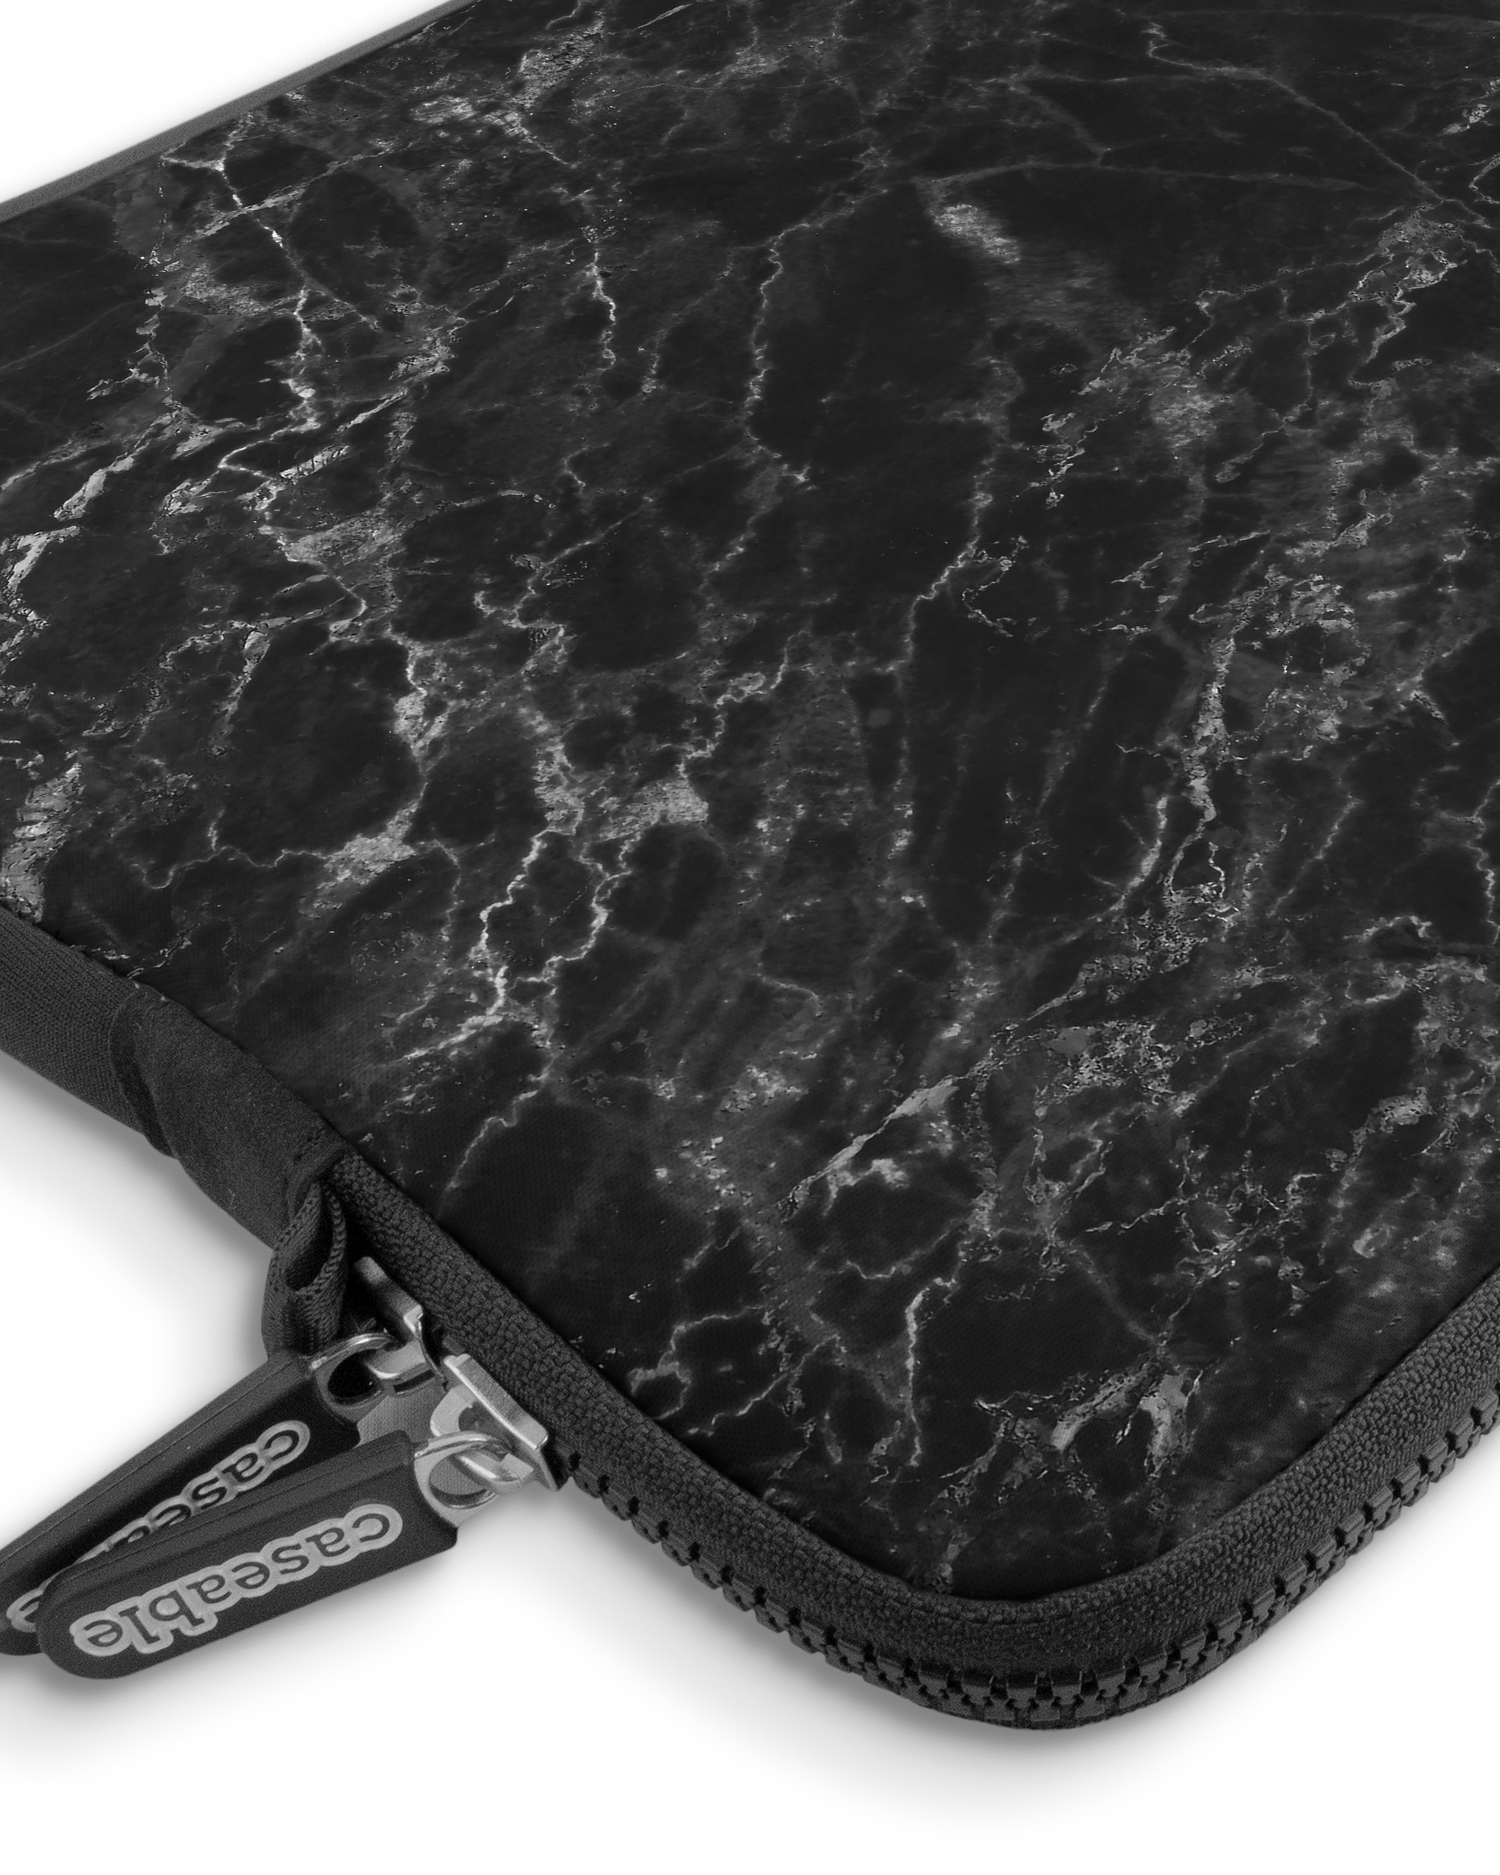 Midnight Marble Premium Laptop Bag 13-14 inch with device inside